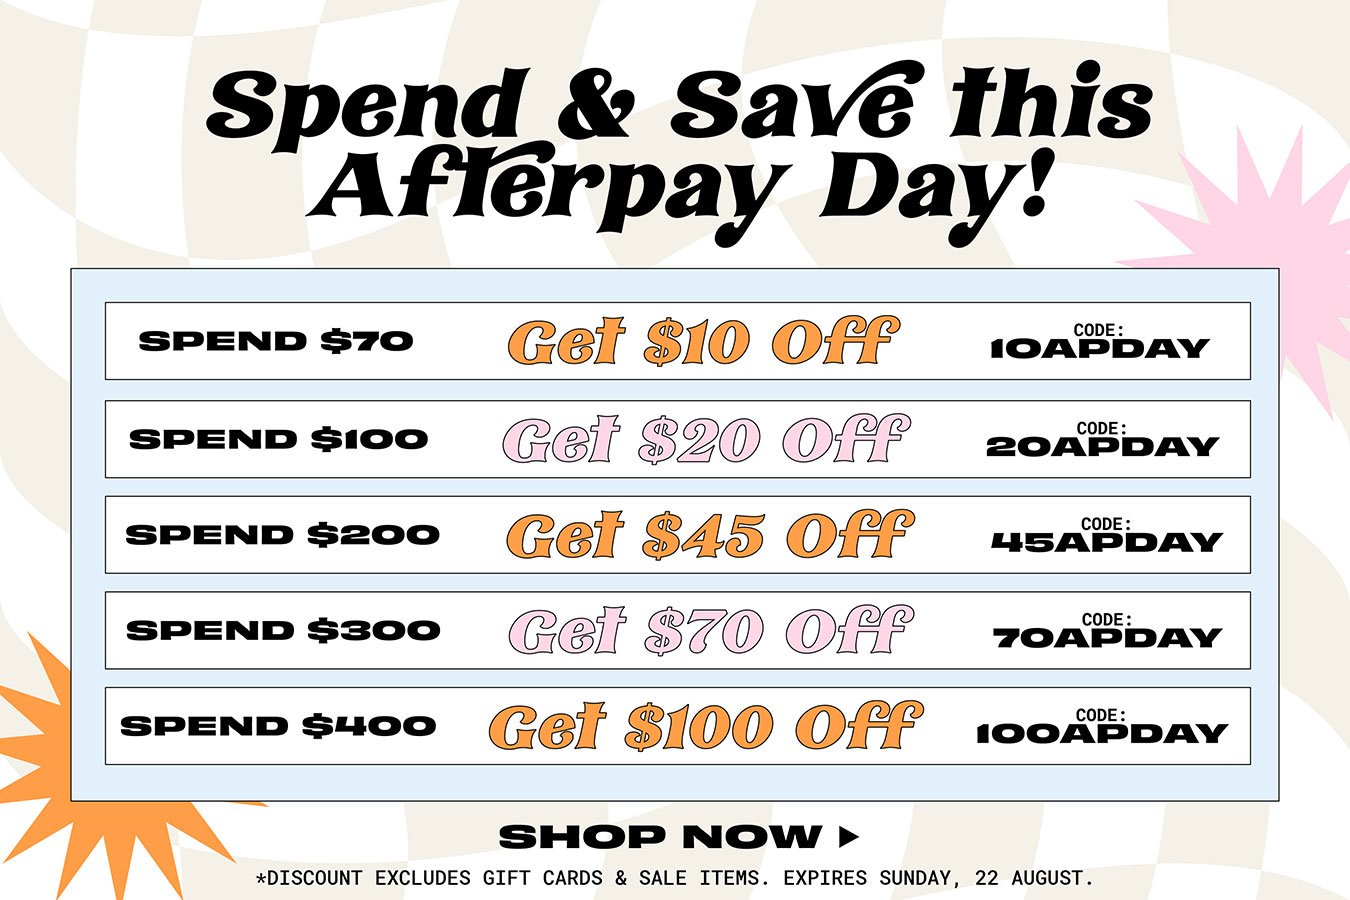 Spend & Save - Extra Up to $100 OFF